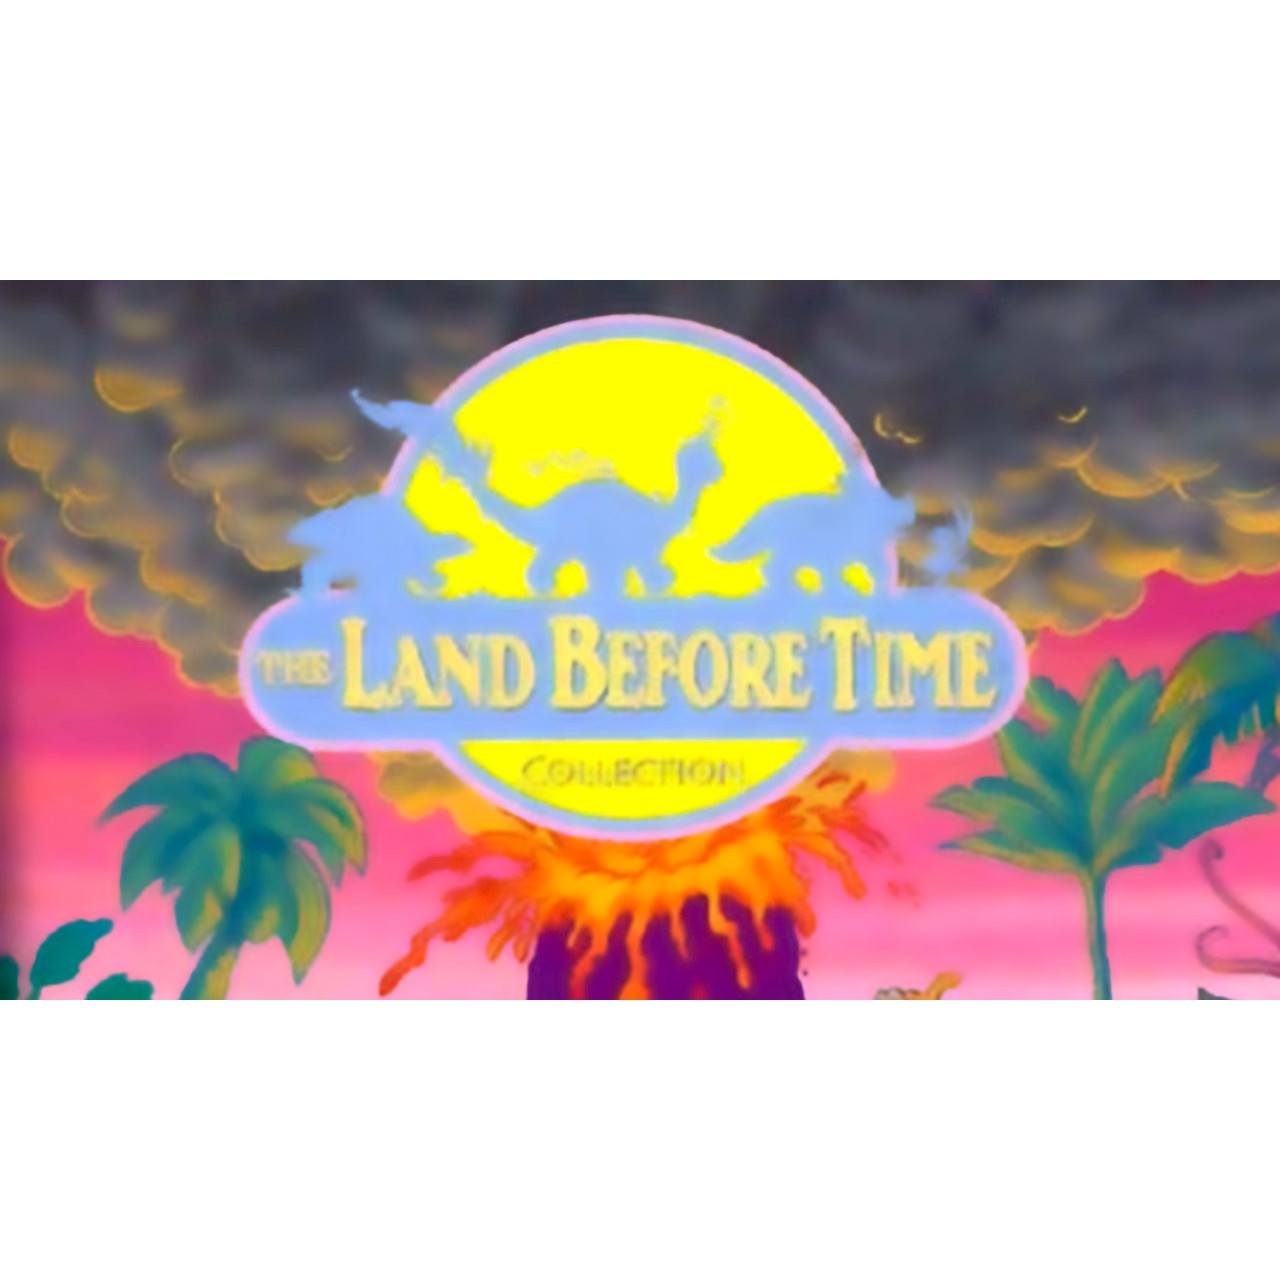 he Land Before Time Nintendo GBA Game Boy Advance Game